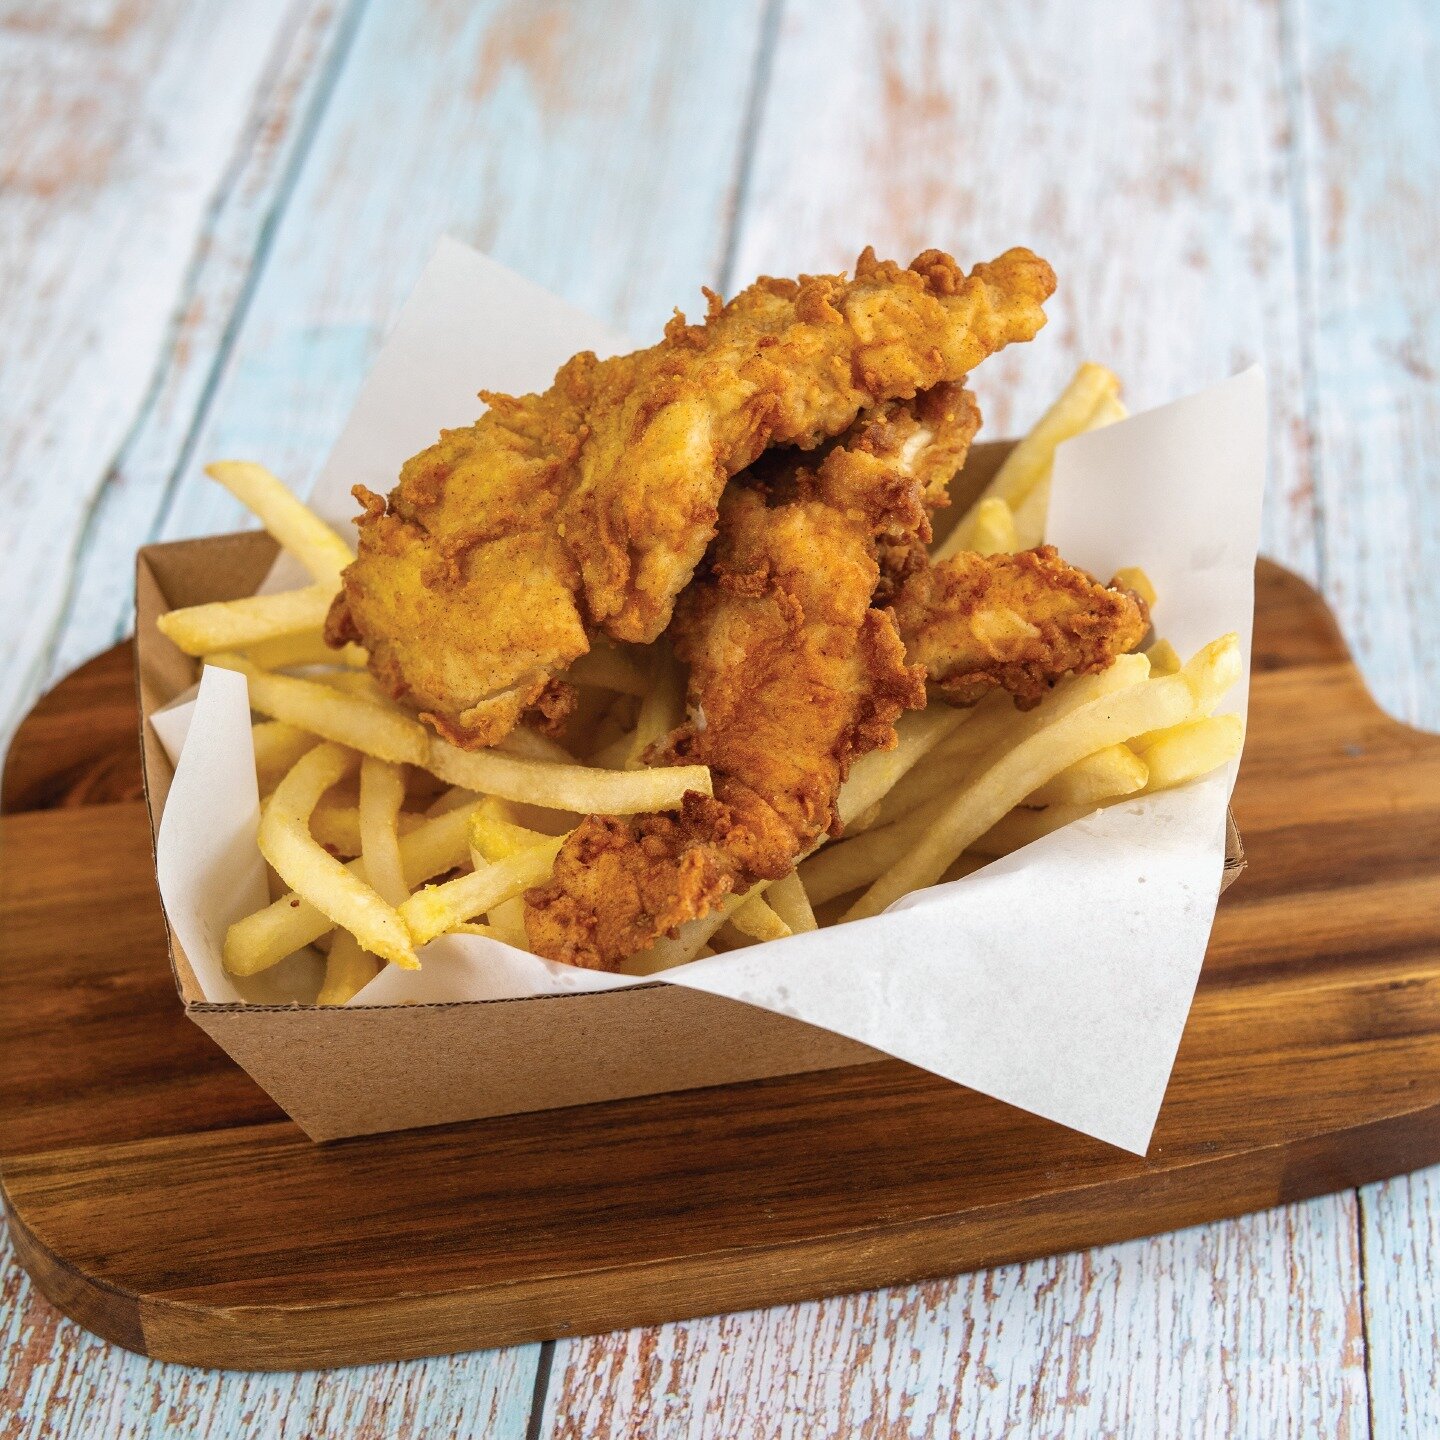 Savour our mouthwatering Strippa meal :: tender fried chicken strips with a light crispy coating, served alongside a selection of sauces. Accompanied by fries, always. 
∘
∘
#StrippaMeal #ChickenLove #FamilyFavourite #Delicious #MouthWatering #SavourT